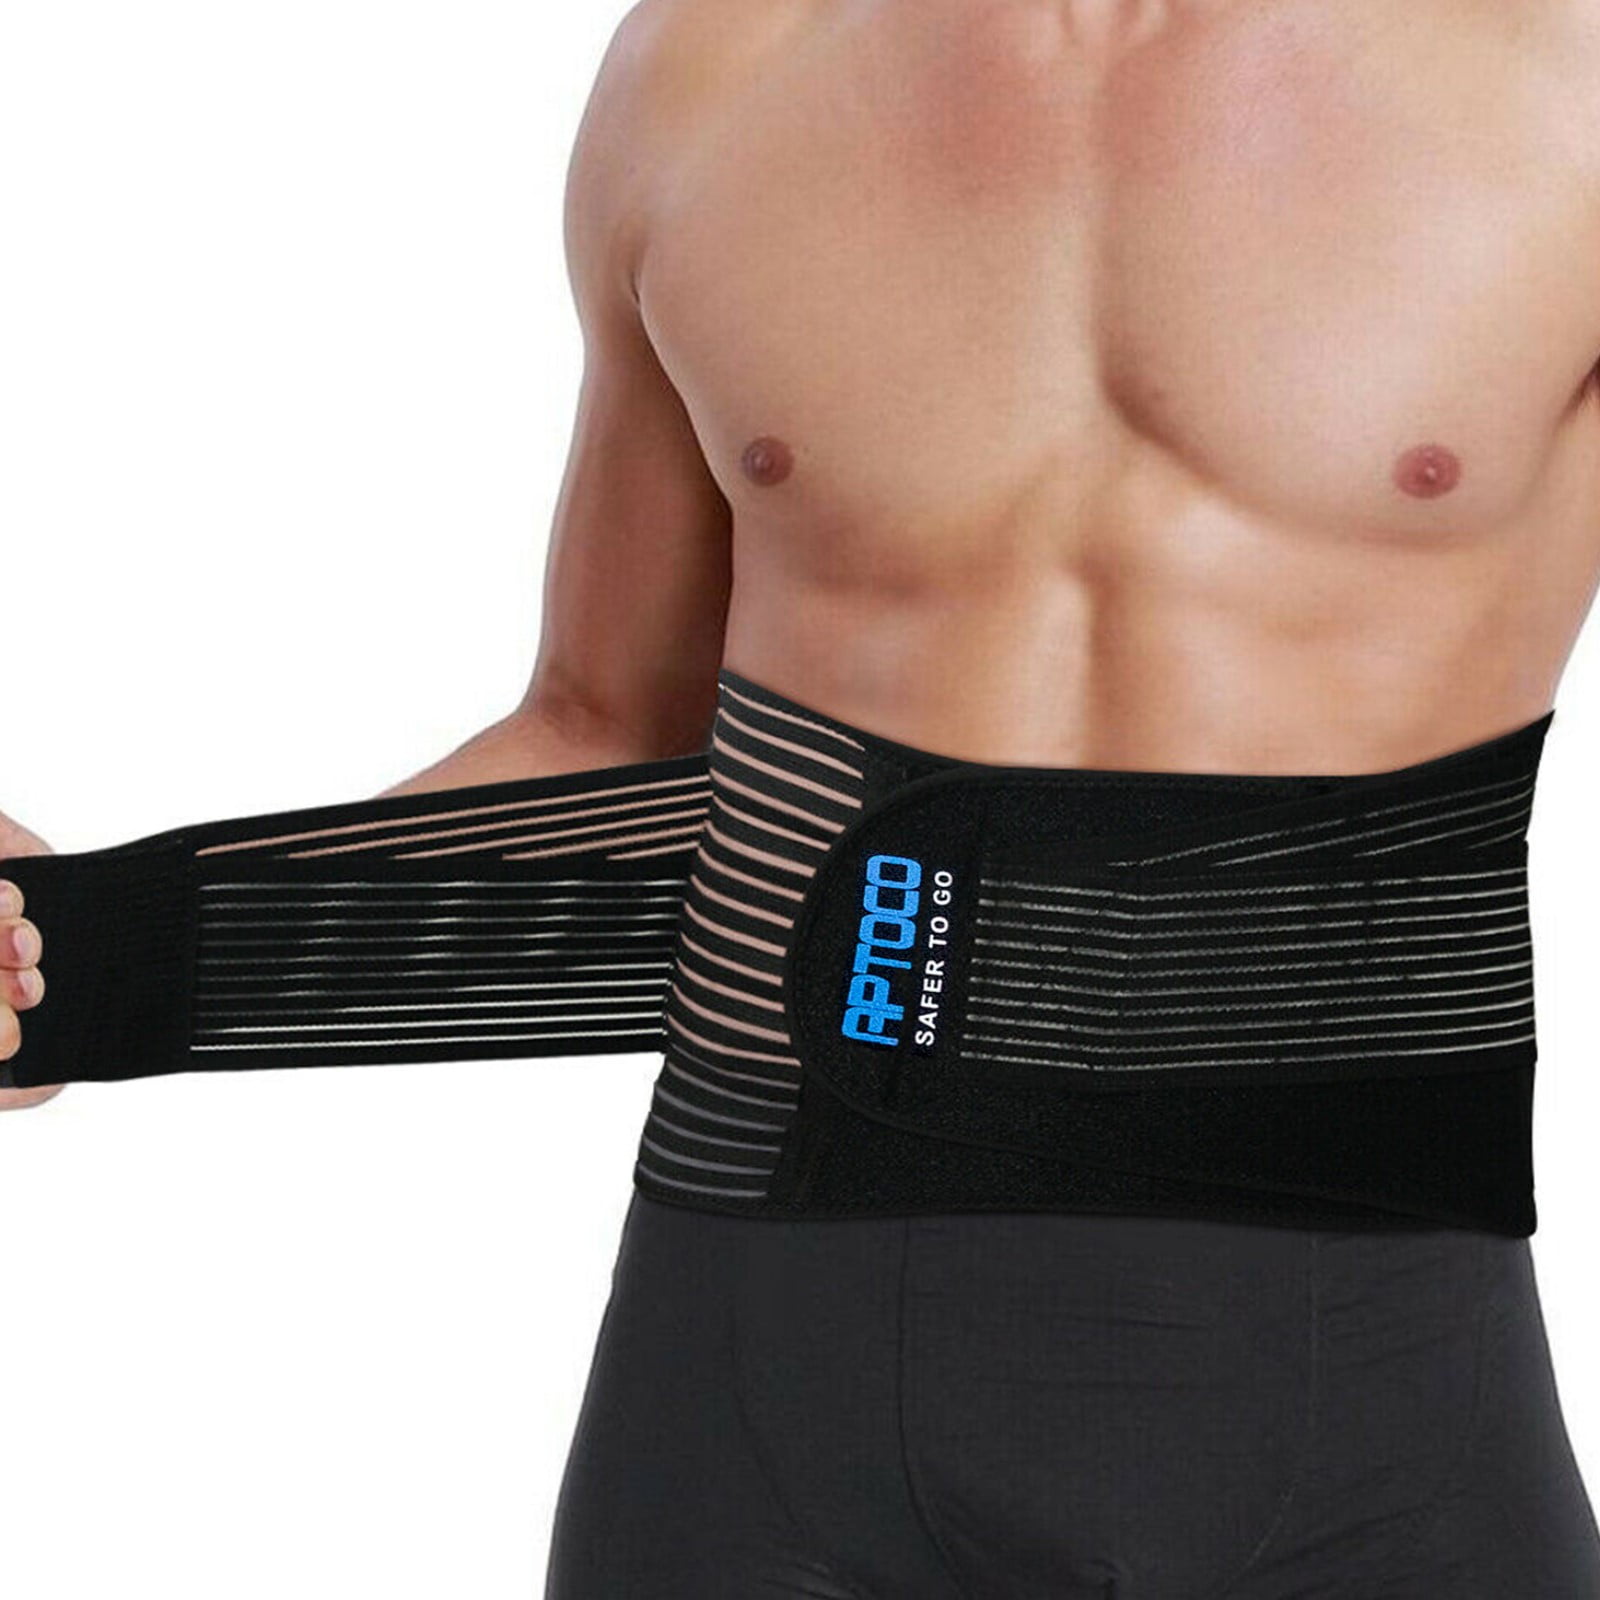 Wellco Adjustable Medical Breathable Back Braces for Lower Back Pain with 4 Stays, Anti-Skid Lumbar Support Belt, Medium, Black